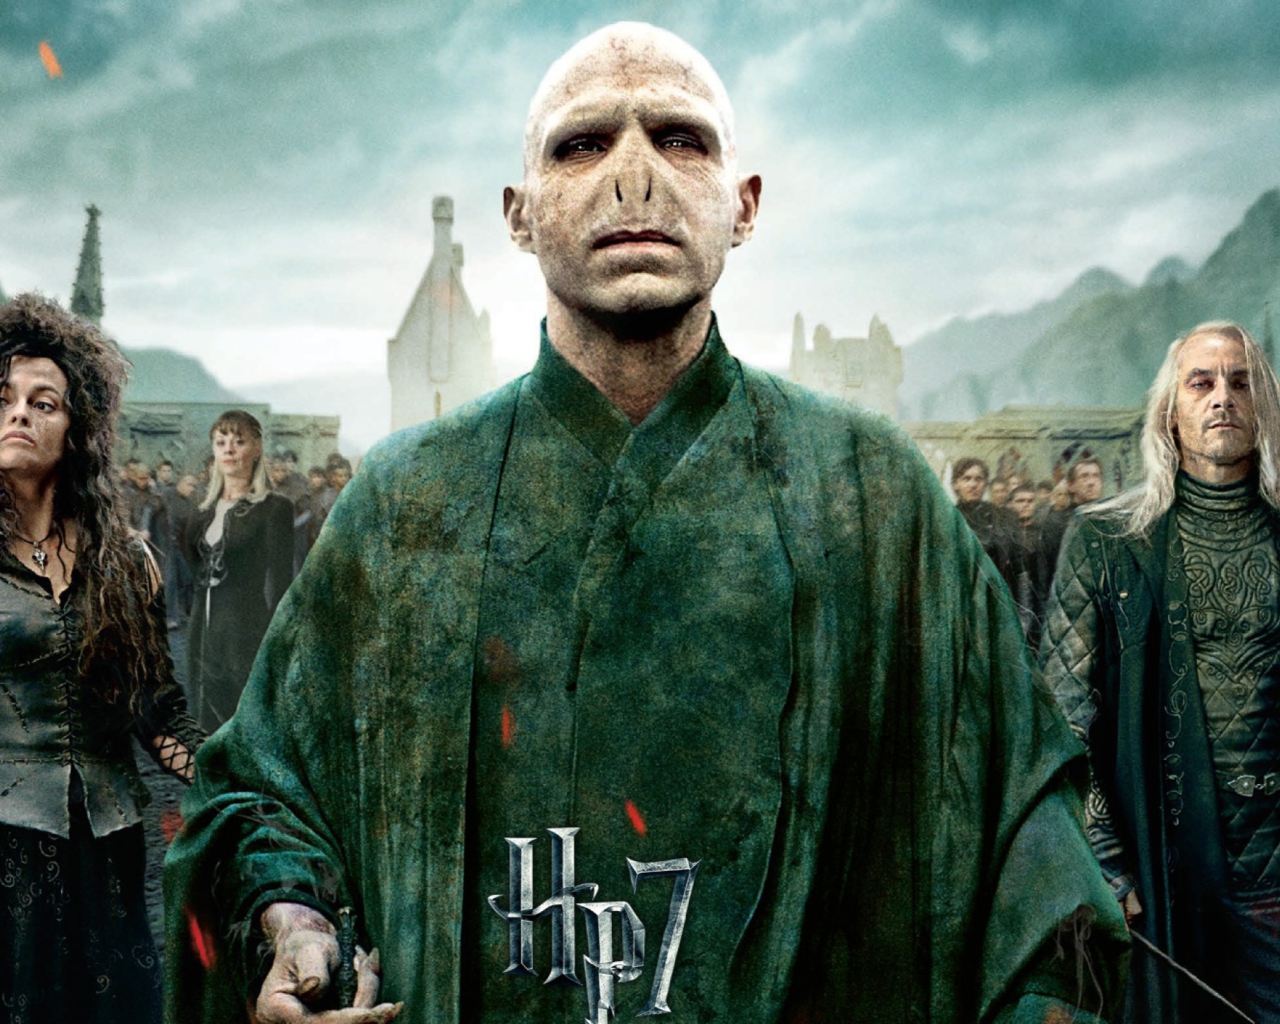 Sfondi Harry Potter And The Deathly Hallows Part 2 1280x1024